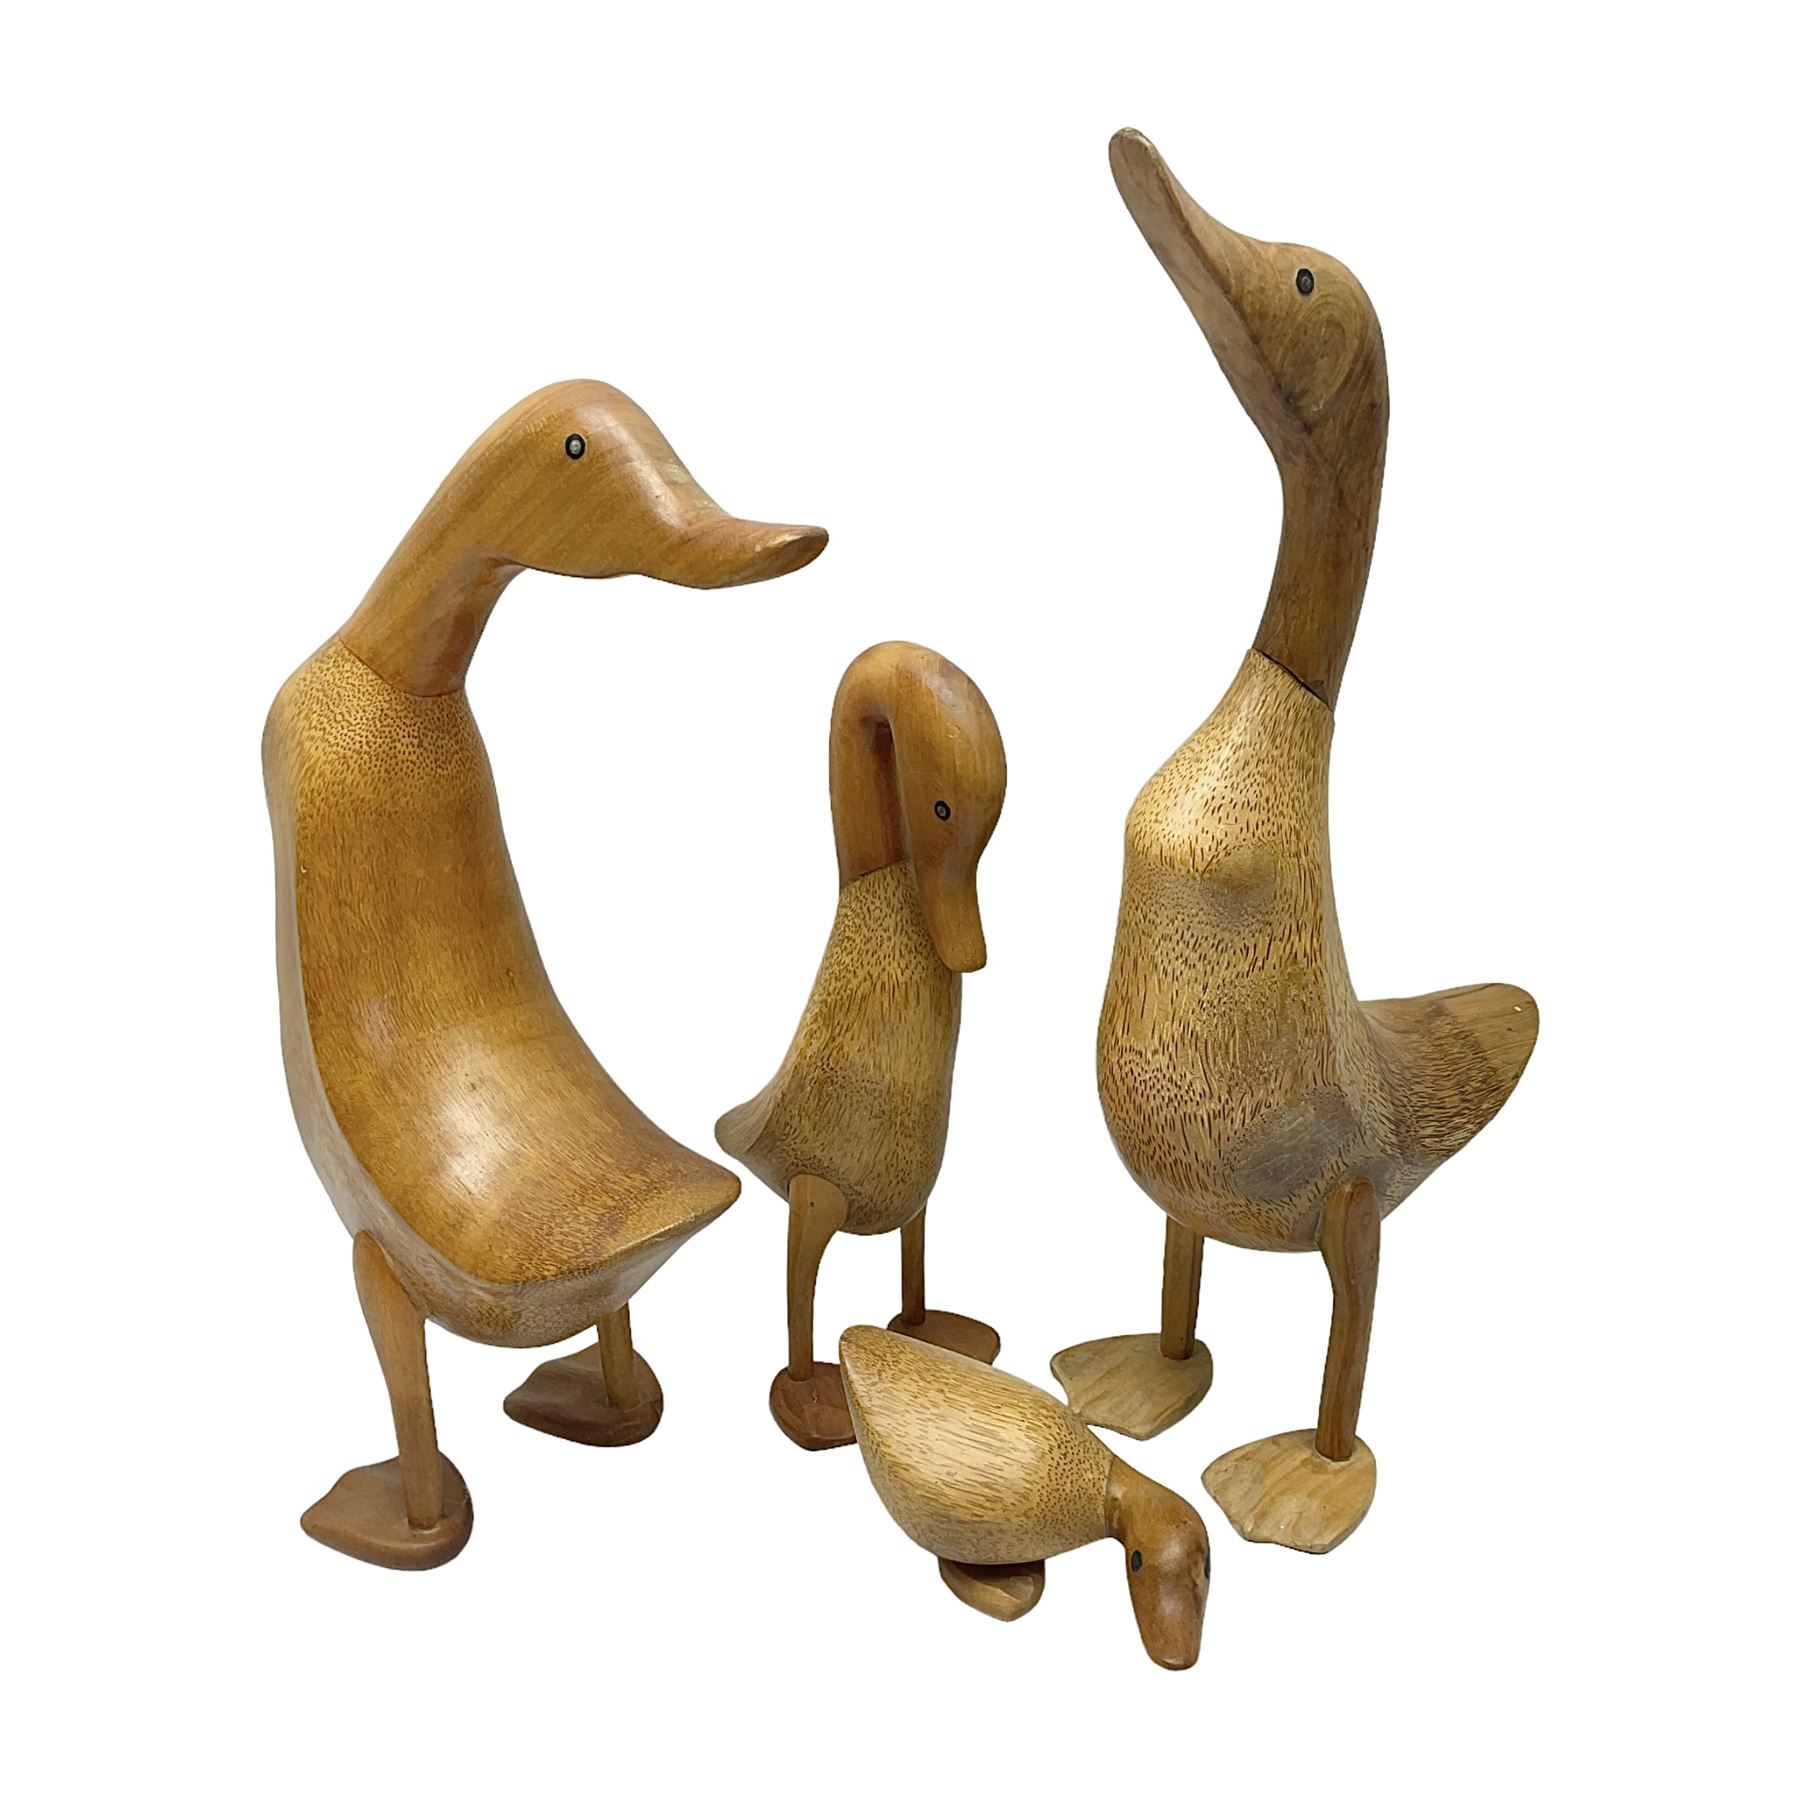 Four carved fruit wood ducks by Dcuk of various sizes